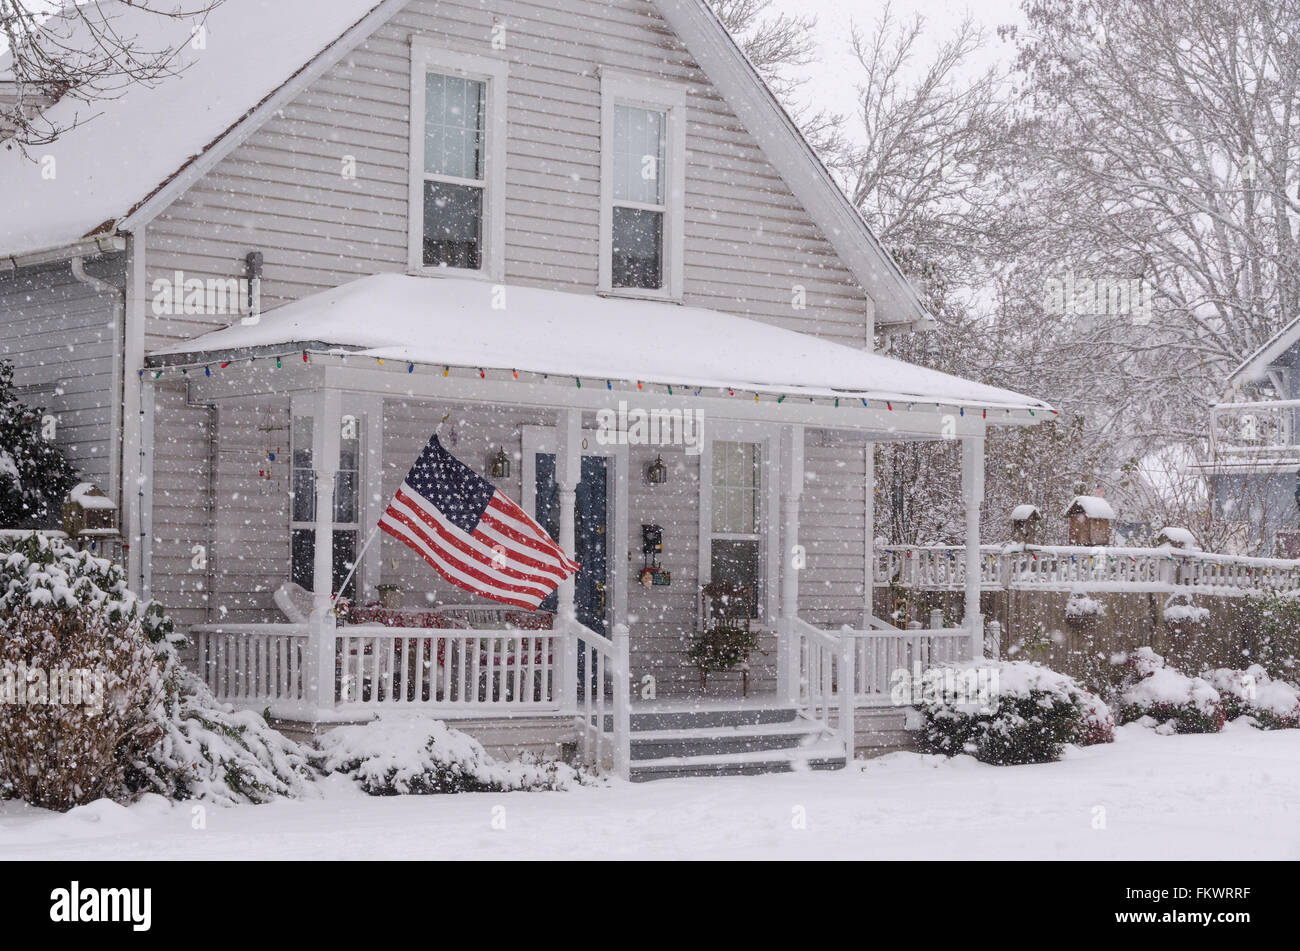 An American flag flies proudly on the porch of an 80 year old house as large snowflakes drift down on the snow-covered ground. Stock Photo